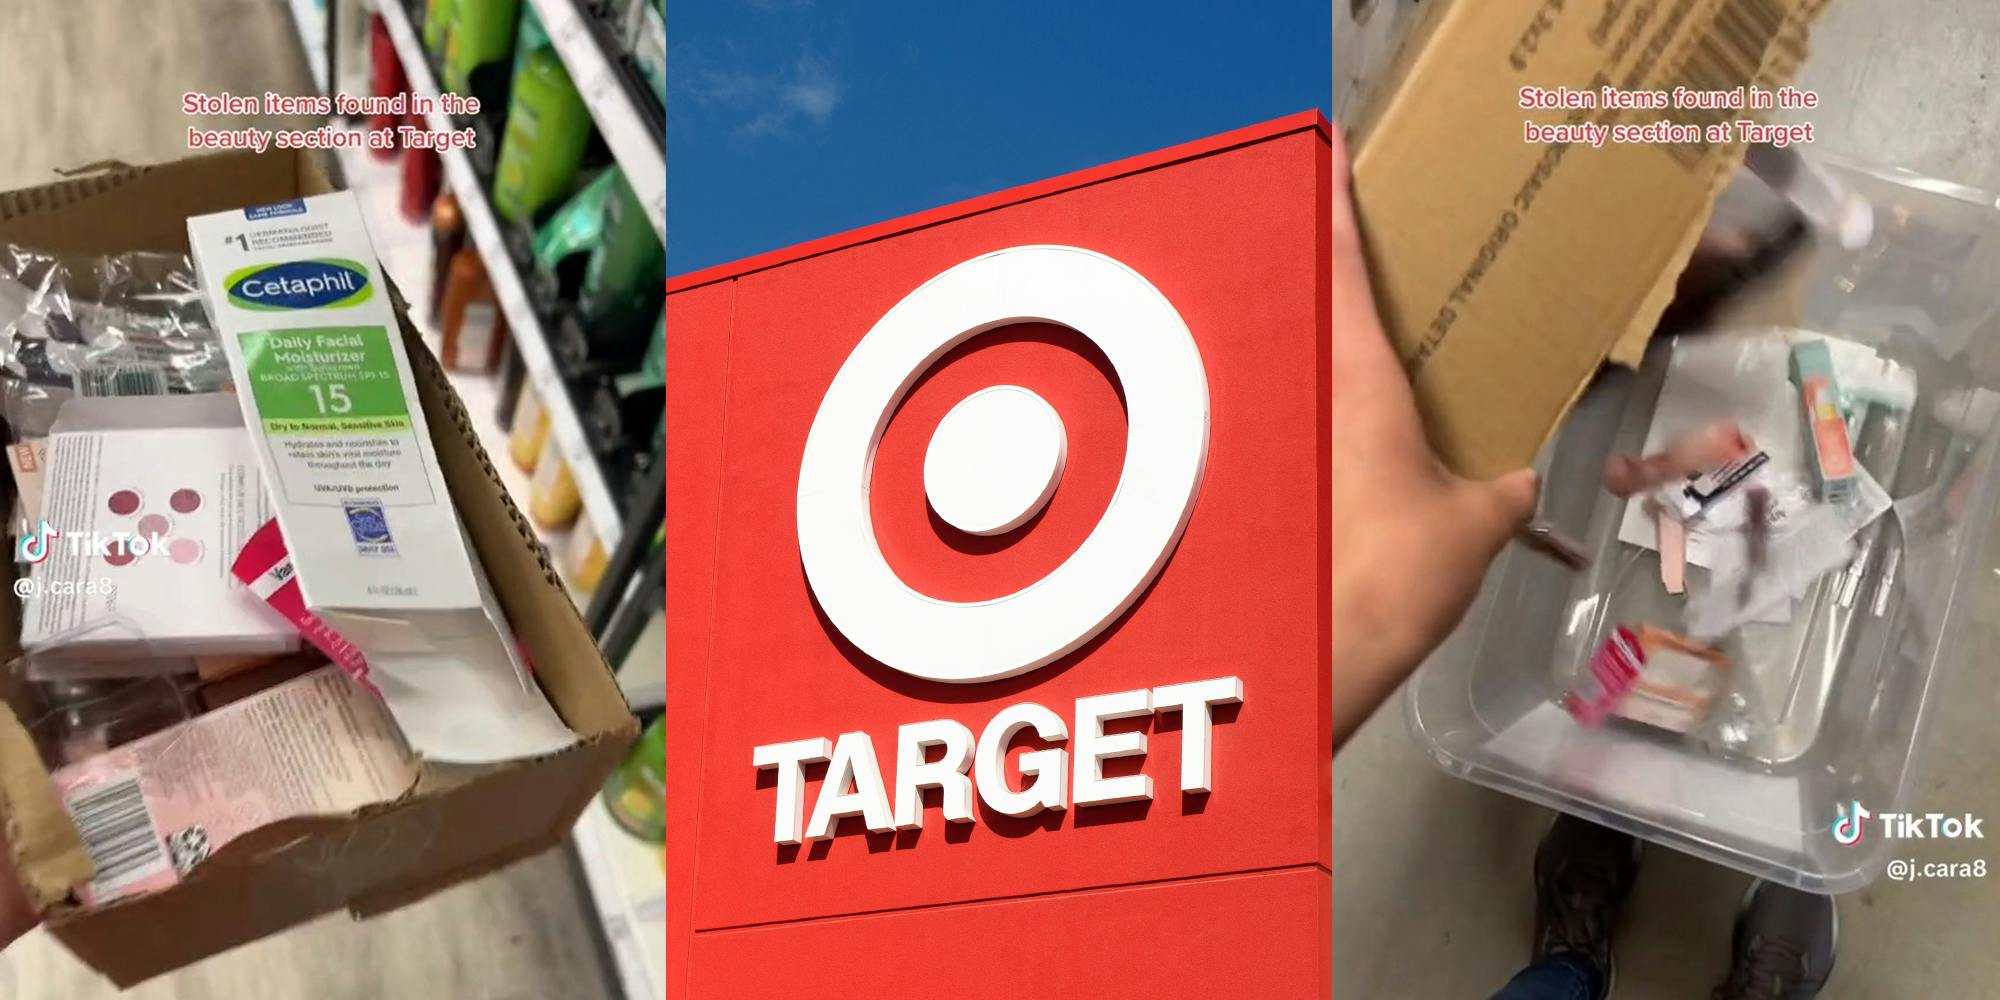 Target worker shares all the items that were stolen in the beauty section that day